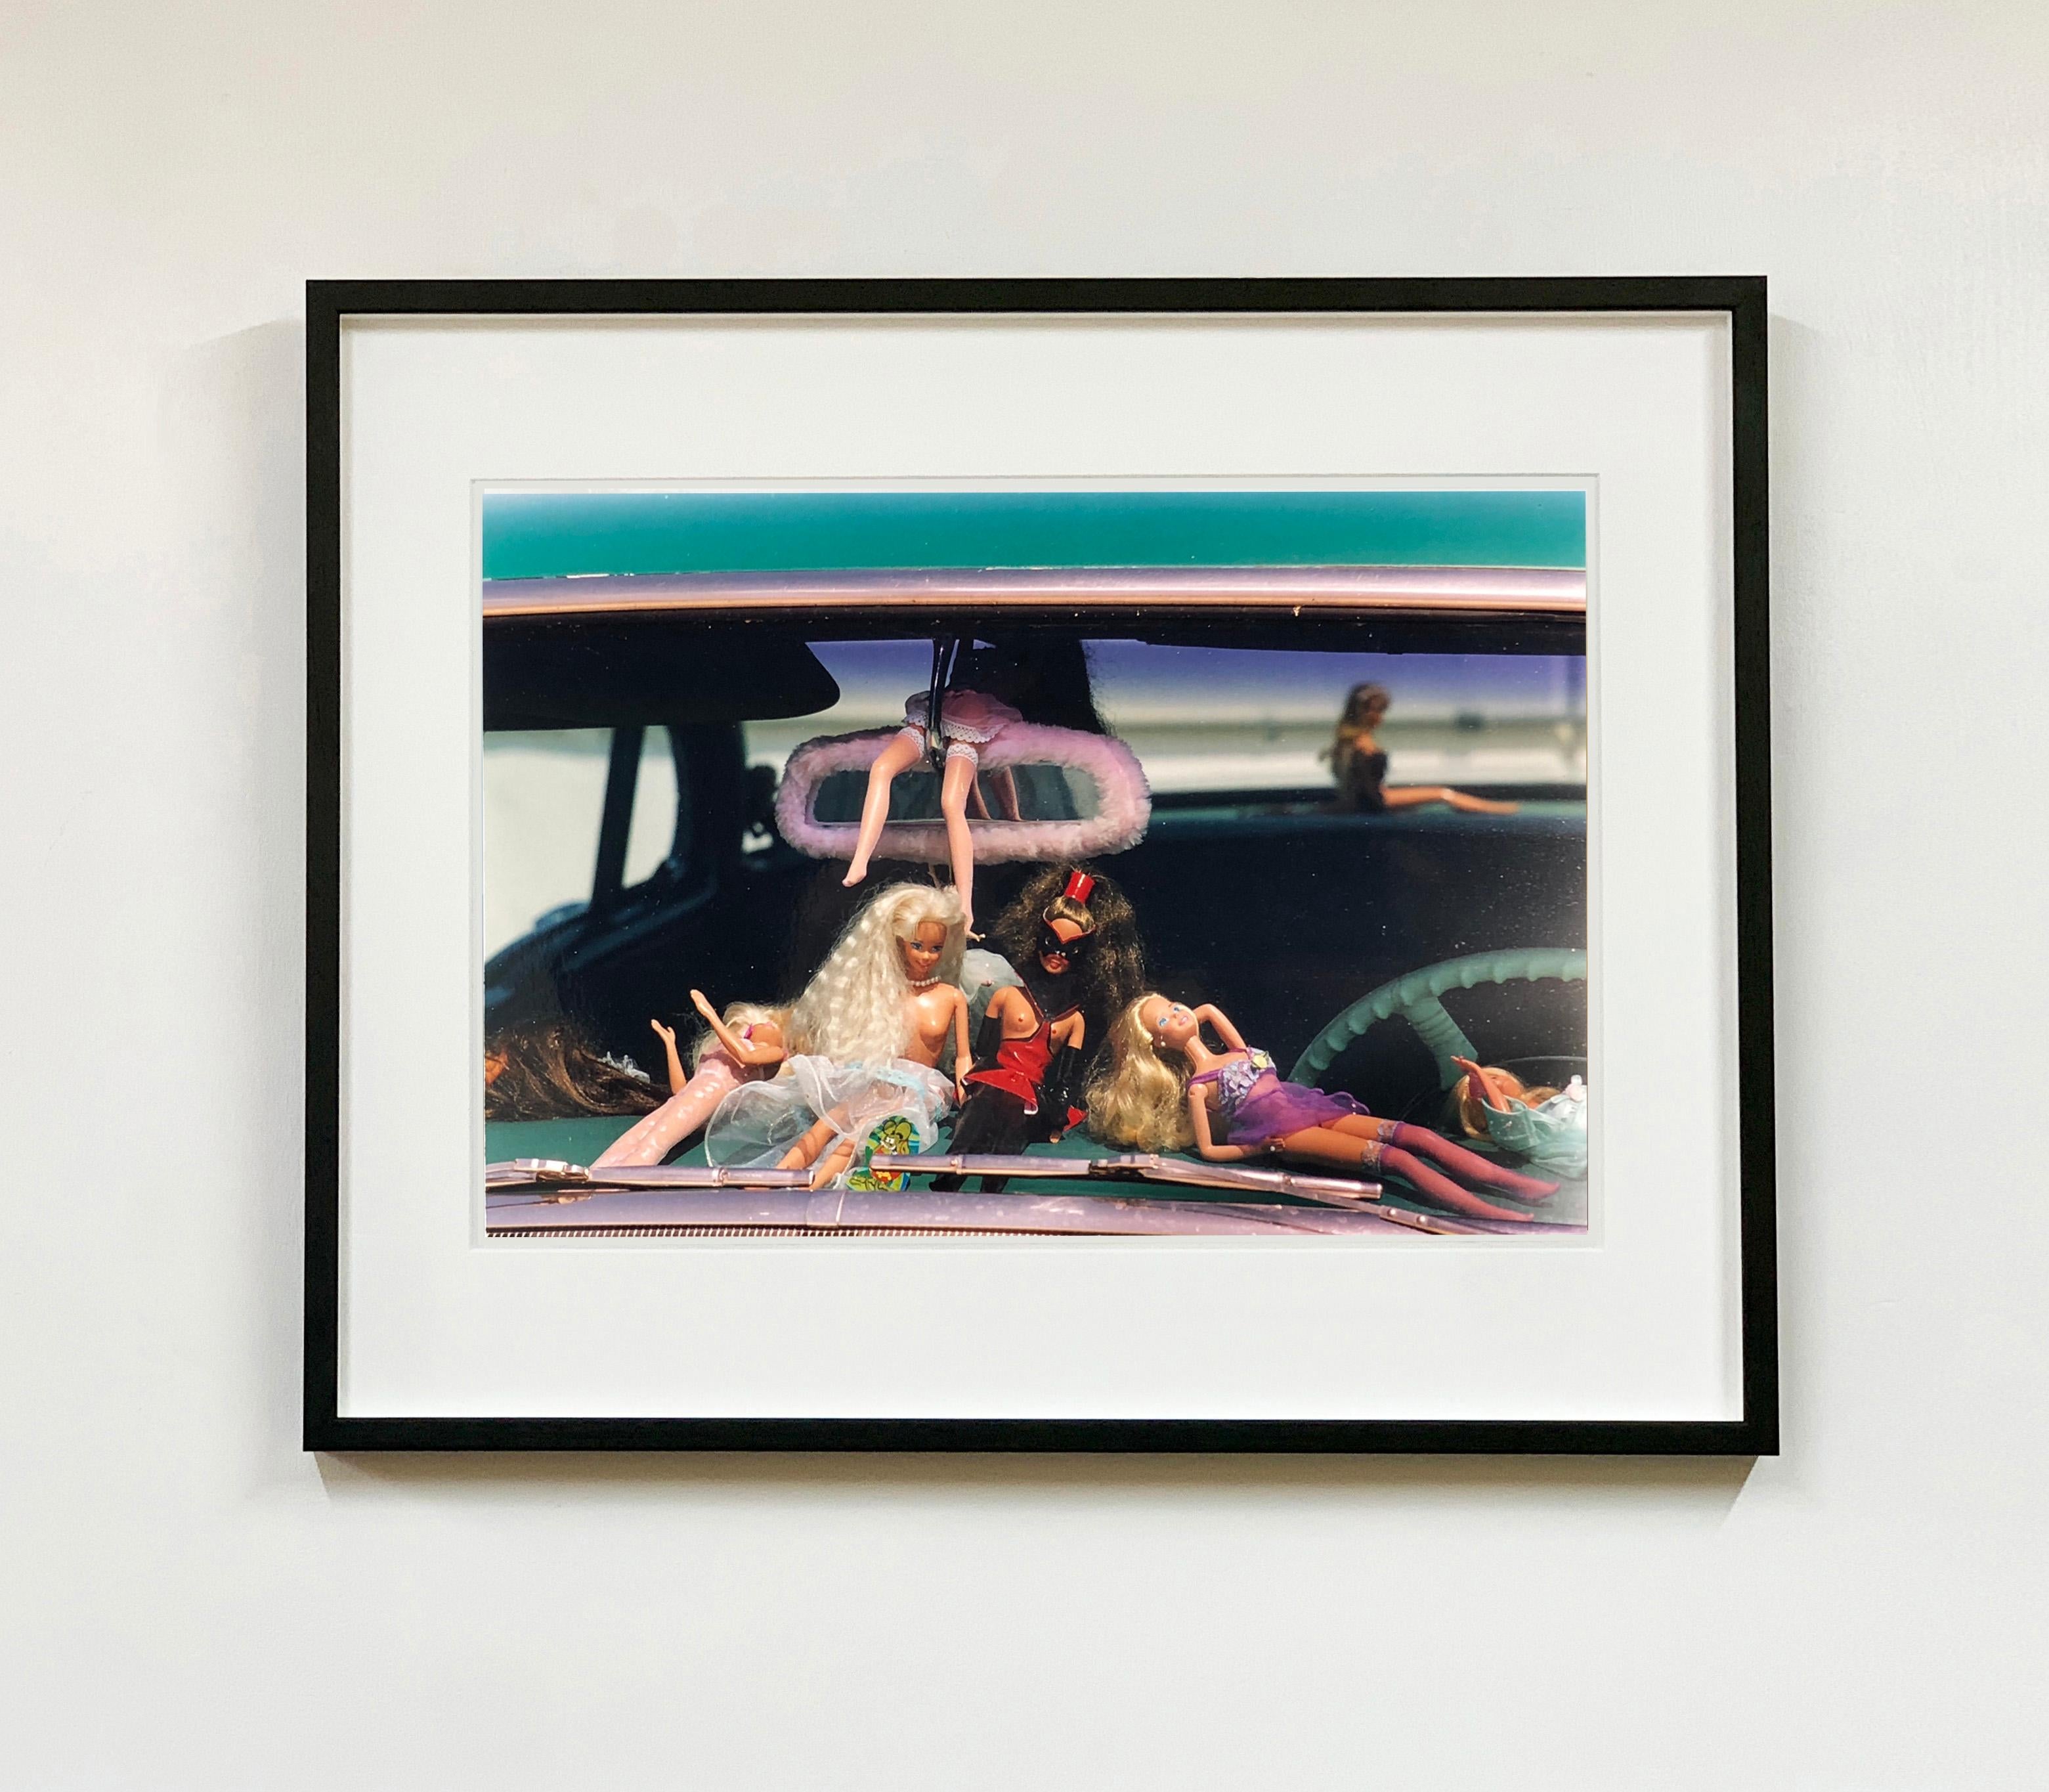 Oldsmobile and Sinful Barbie's, from Richard Heeps' 'Man's Ruin' Series. This artwork is part of a sequence capturing Wendy at the Rockabilly Weekender, Viva Las Vegas, these Barbie's adorn the dashboard of her classic American car, captured through